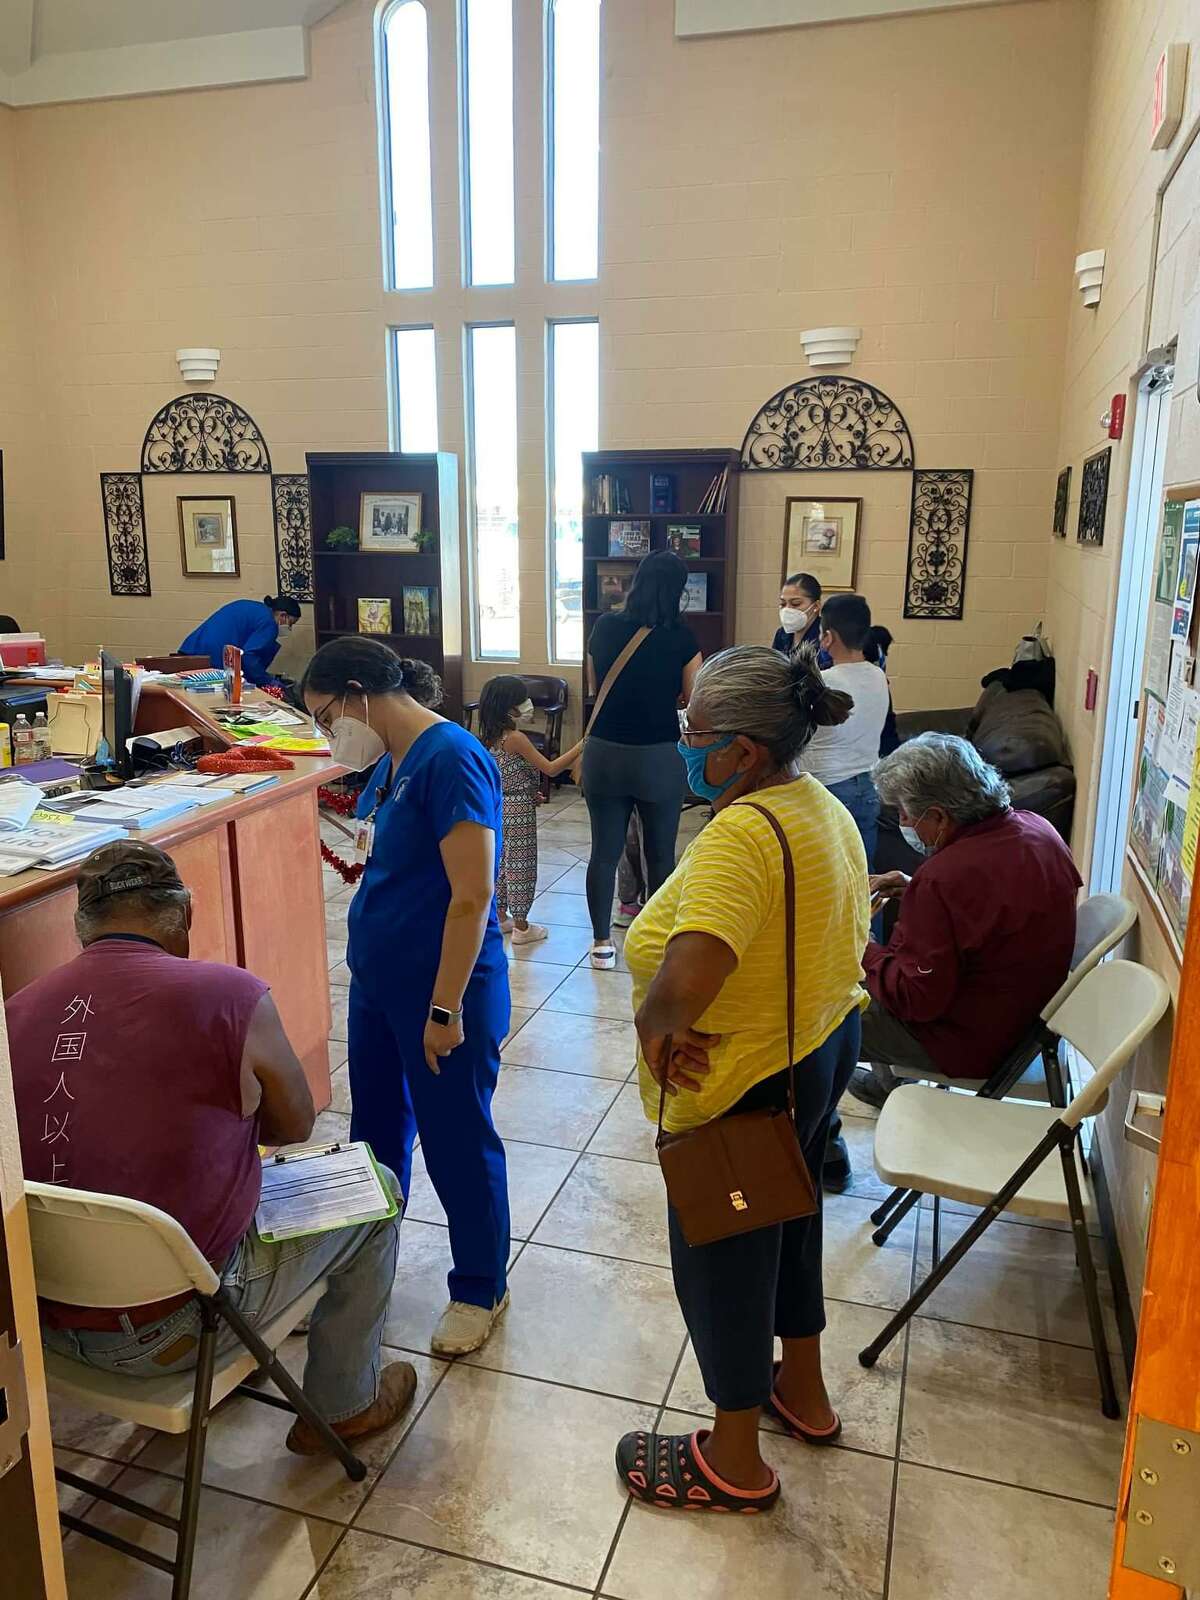 Gateway Community Health Services performed vaccine drives in the cities of Rio Bravo, El Cenizo and La Preza over the last week in conjunction with Webb County Commissioner of Precinct 1 Jesse Gonzalez.